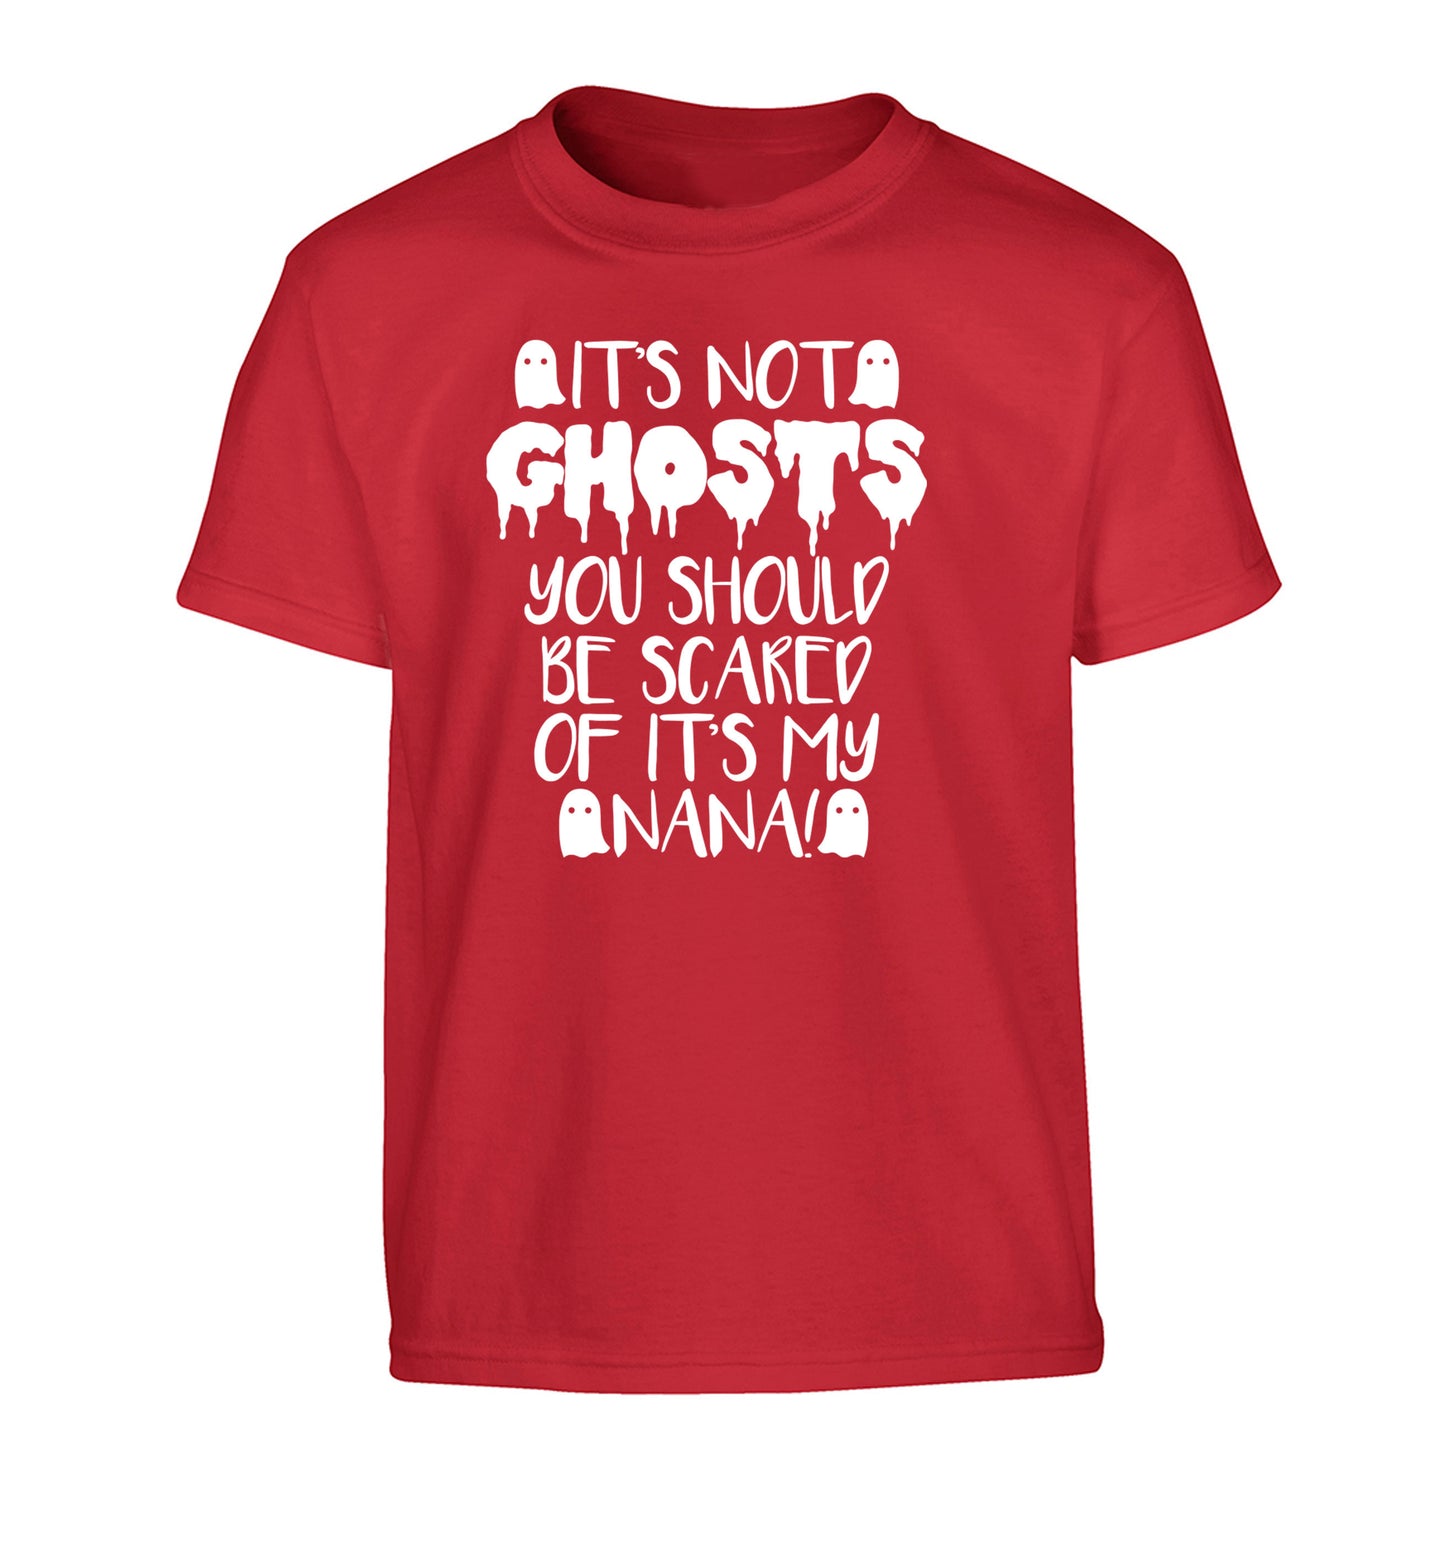 It's not ghosts you should be scared of it's my nana! Children's red Tshirt 12-14 Years